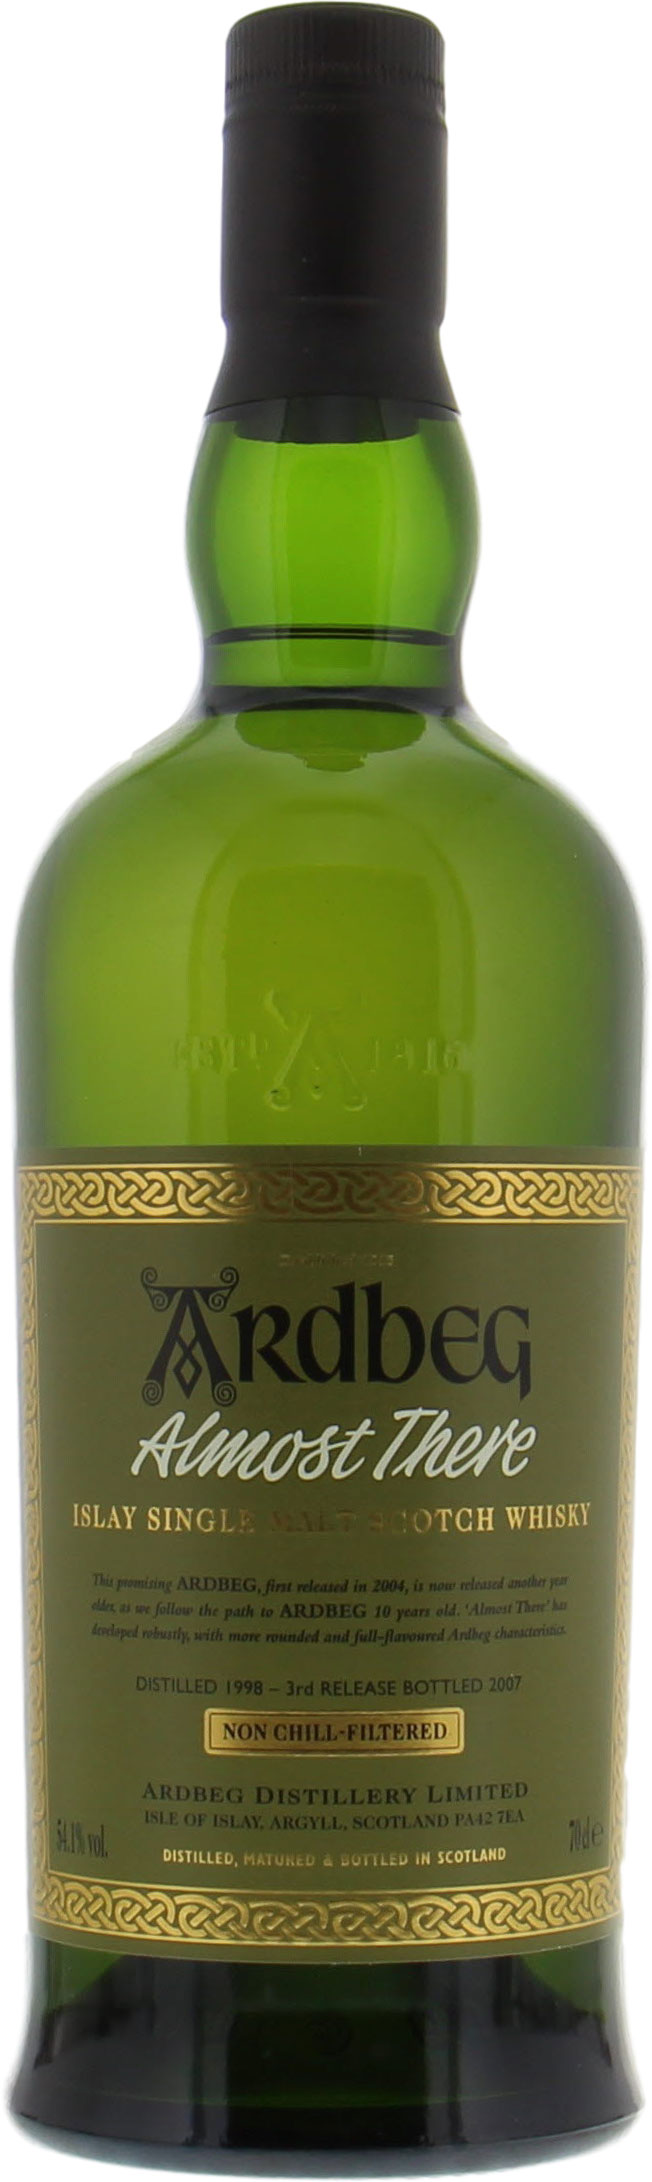 Ardbeg - Almost There 3rd Release 54.1% 1998